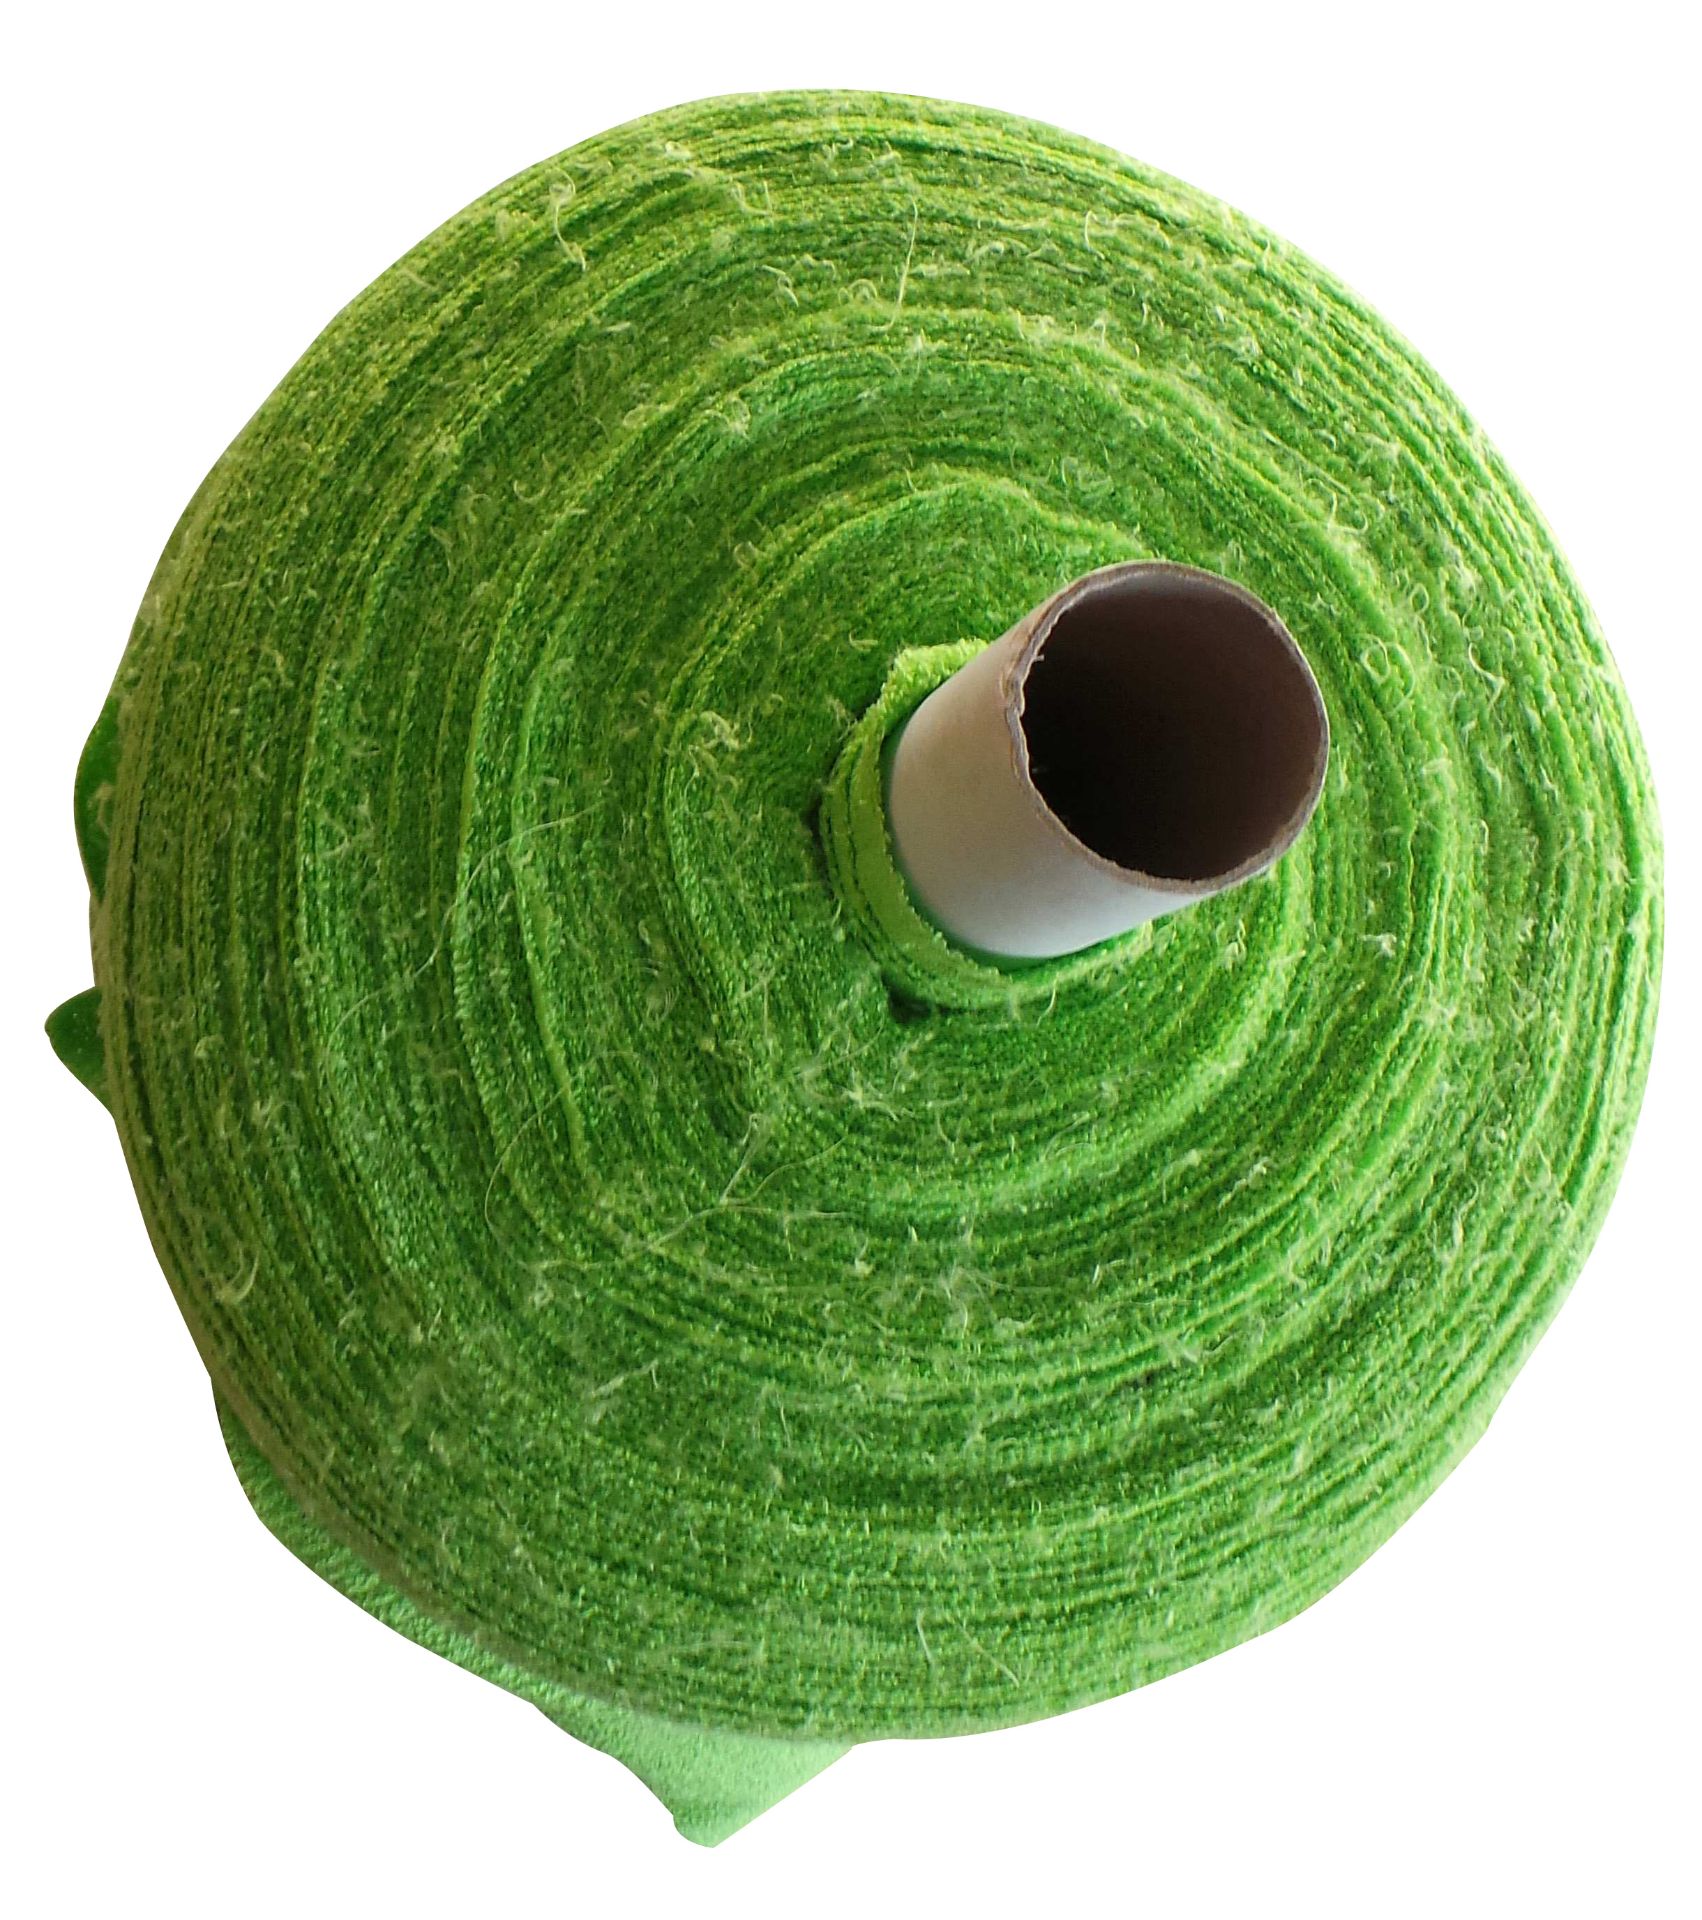 One Off Joblot of 100 Square Metres of Lime Green Terry Cotton/Nylon Fabrics - Image 5 of 5